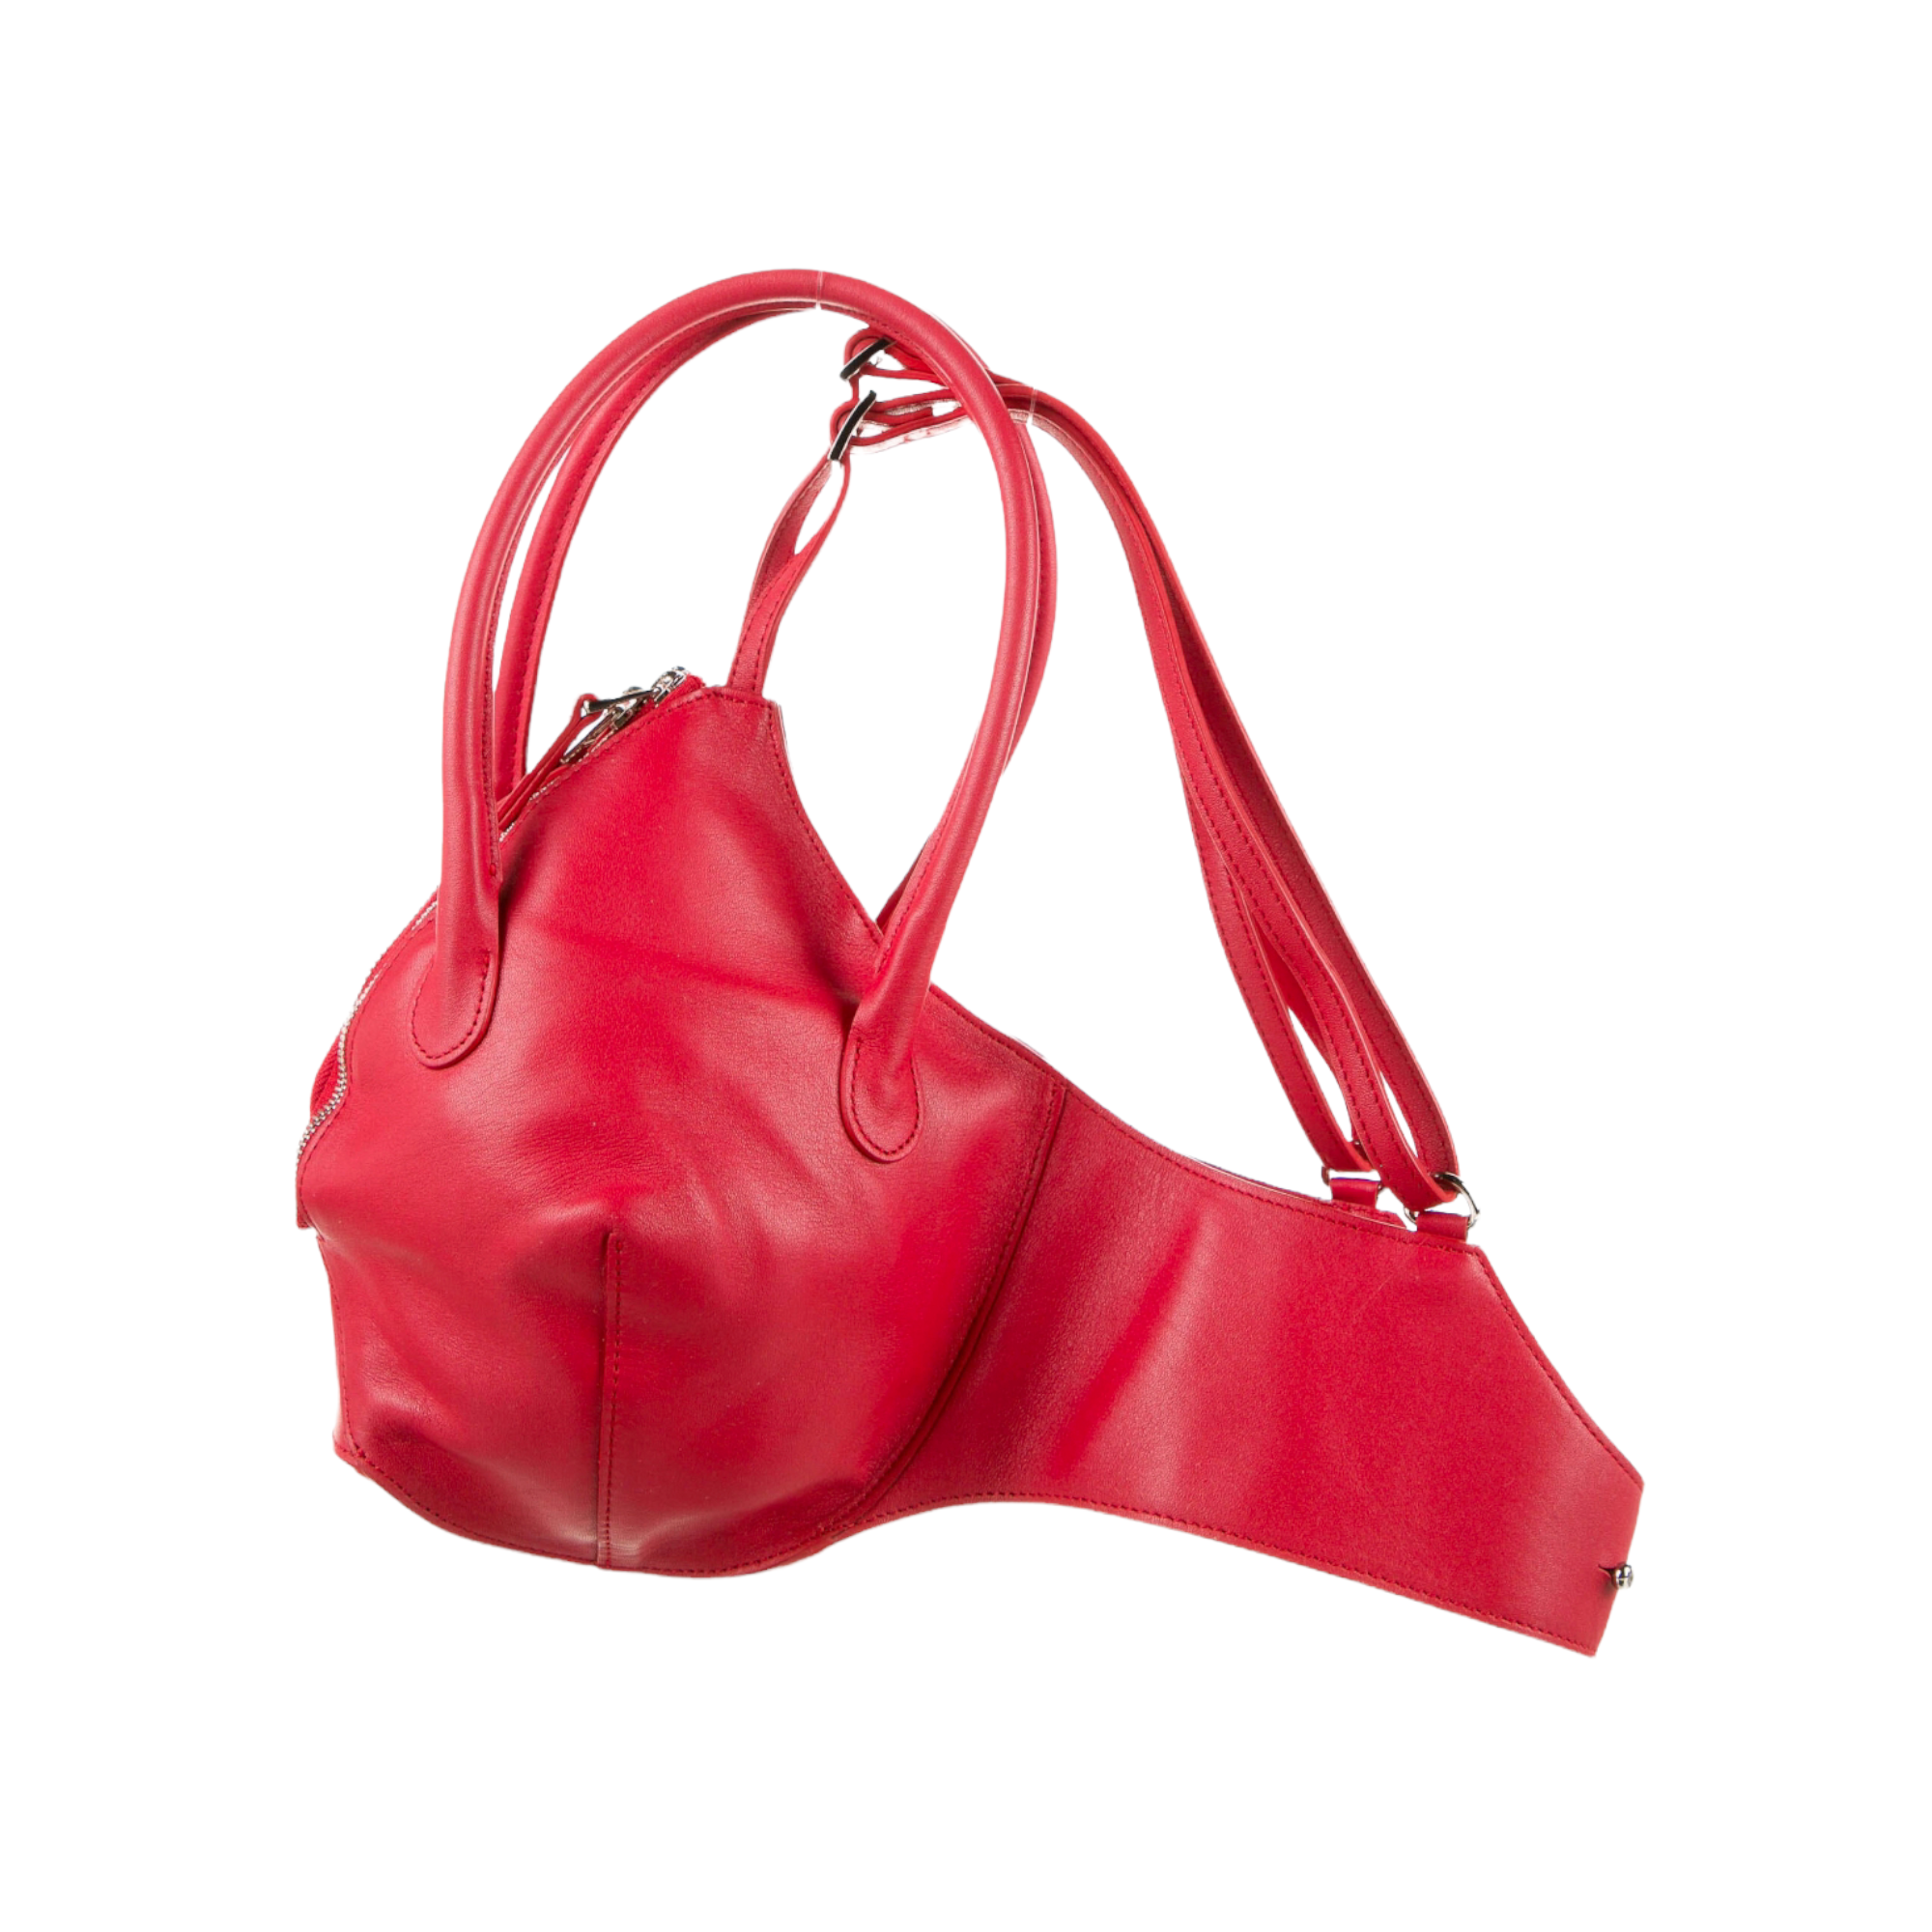 Leather Bra bag – As You Can See